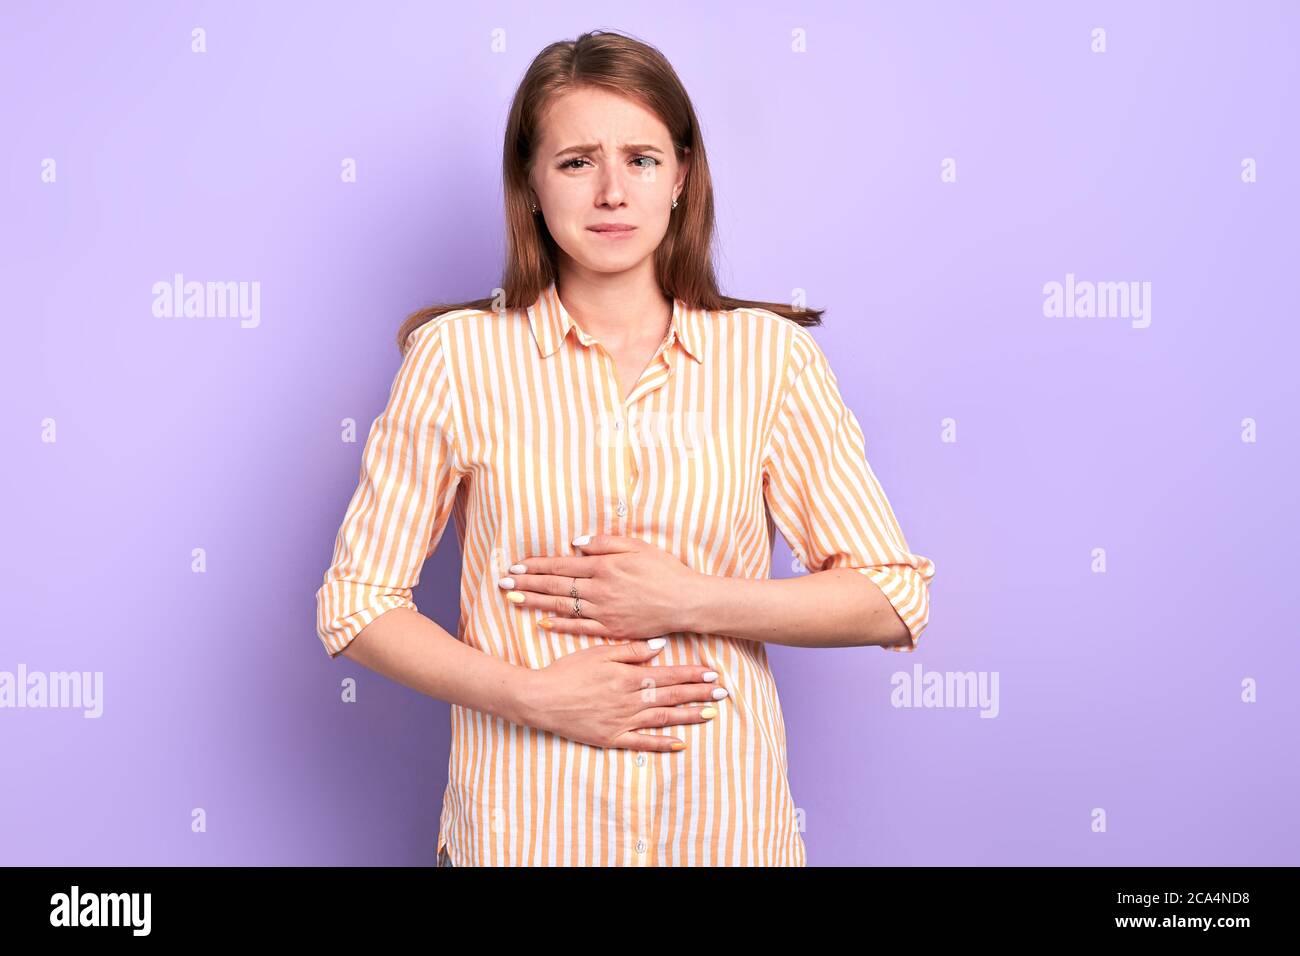 Sad young woman suffers from stomachache, feels discomfort after eating spoiled food, has painful face expression, hands on belly, dressed in casual s Stock Photo